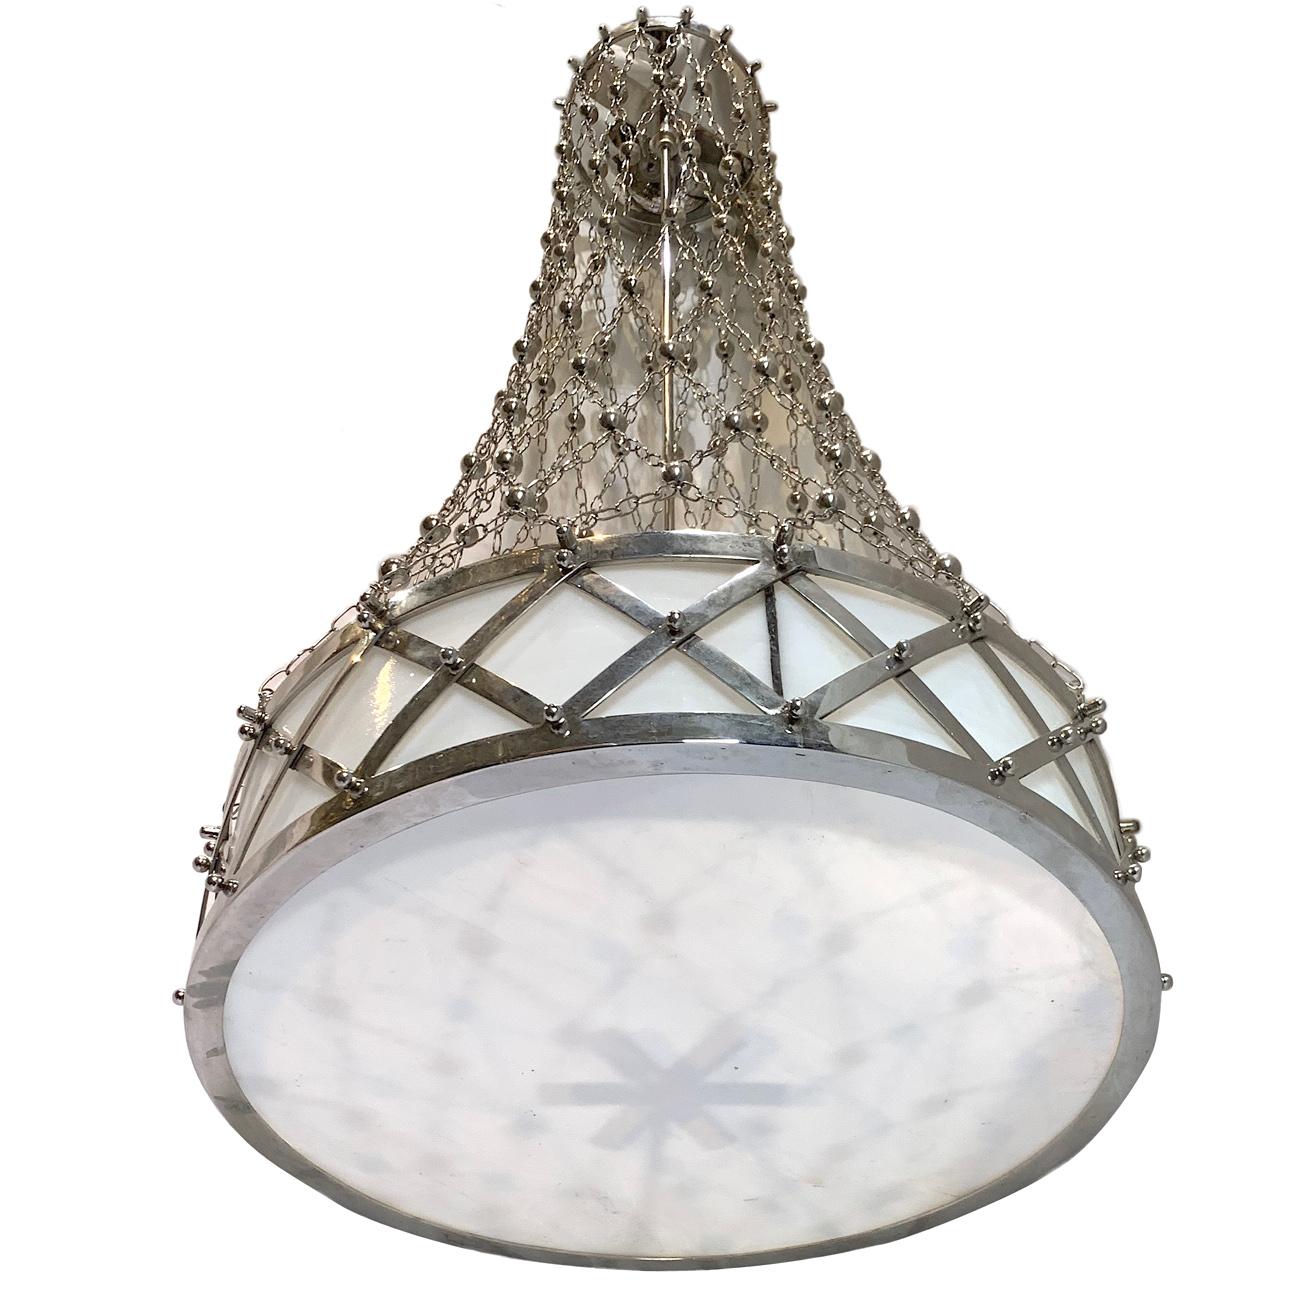 Pair of circa 1920’s French silver-plated light fixtures with net chain and milk glass insets with three interior Edison sockets. Sold individually.

Measurements:
Diameter: 18?
Drop: 40? (adjustable).